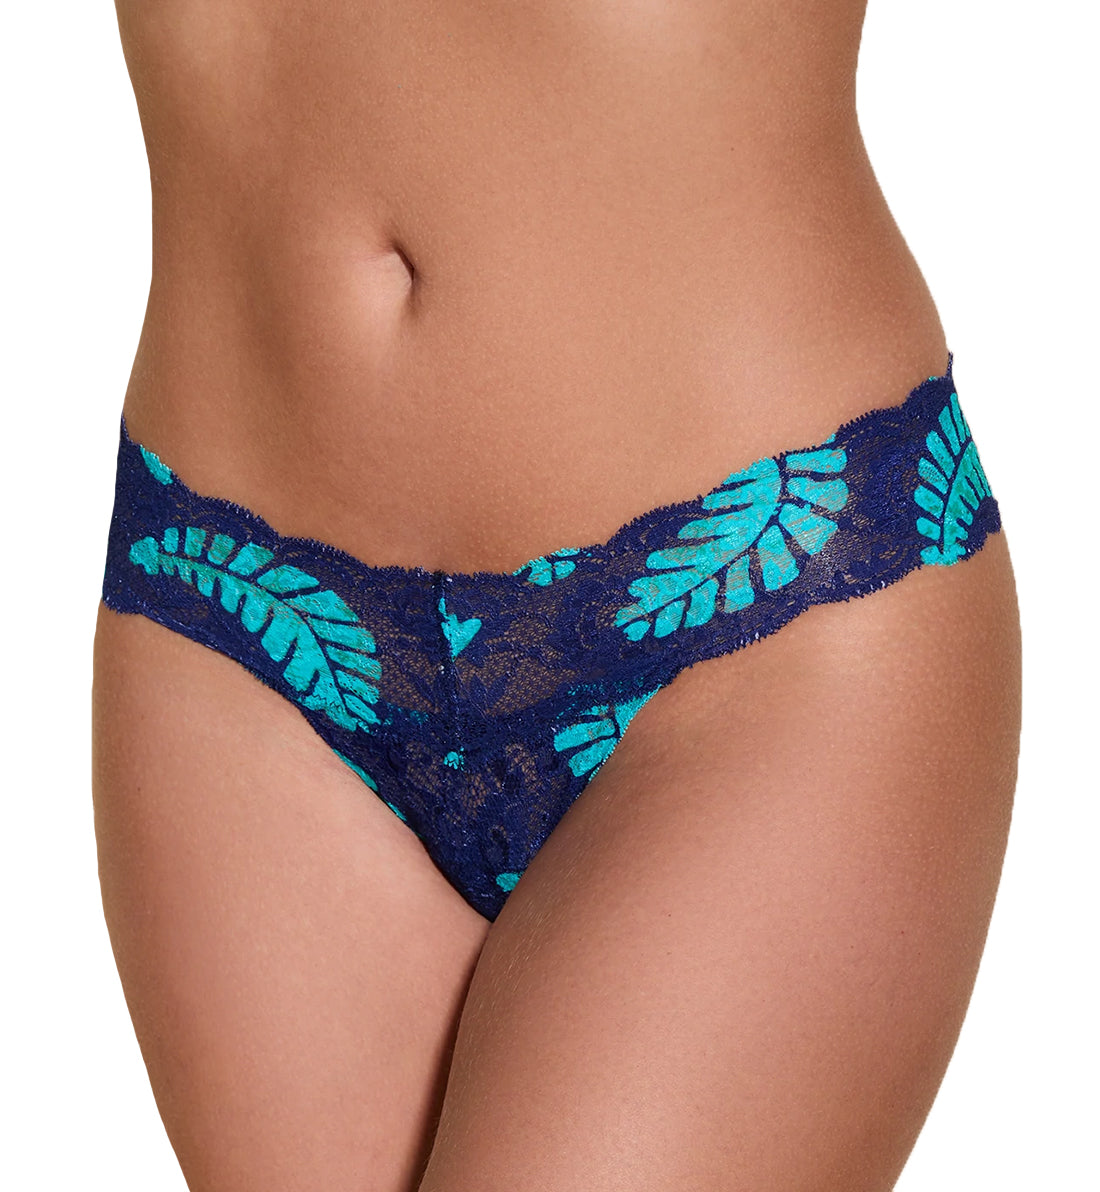 Cosabella Never Say Never Printed Cutie Thong (NEVEP0321),Leaf - Leaf,One Size